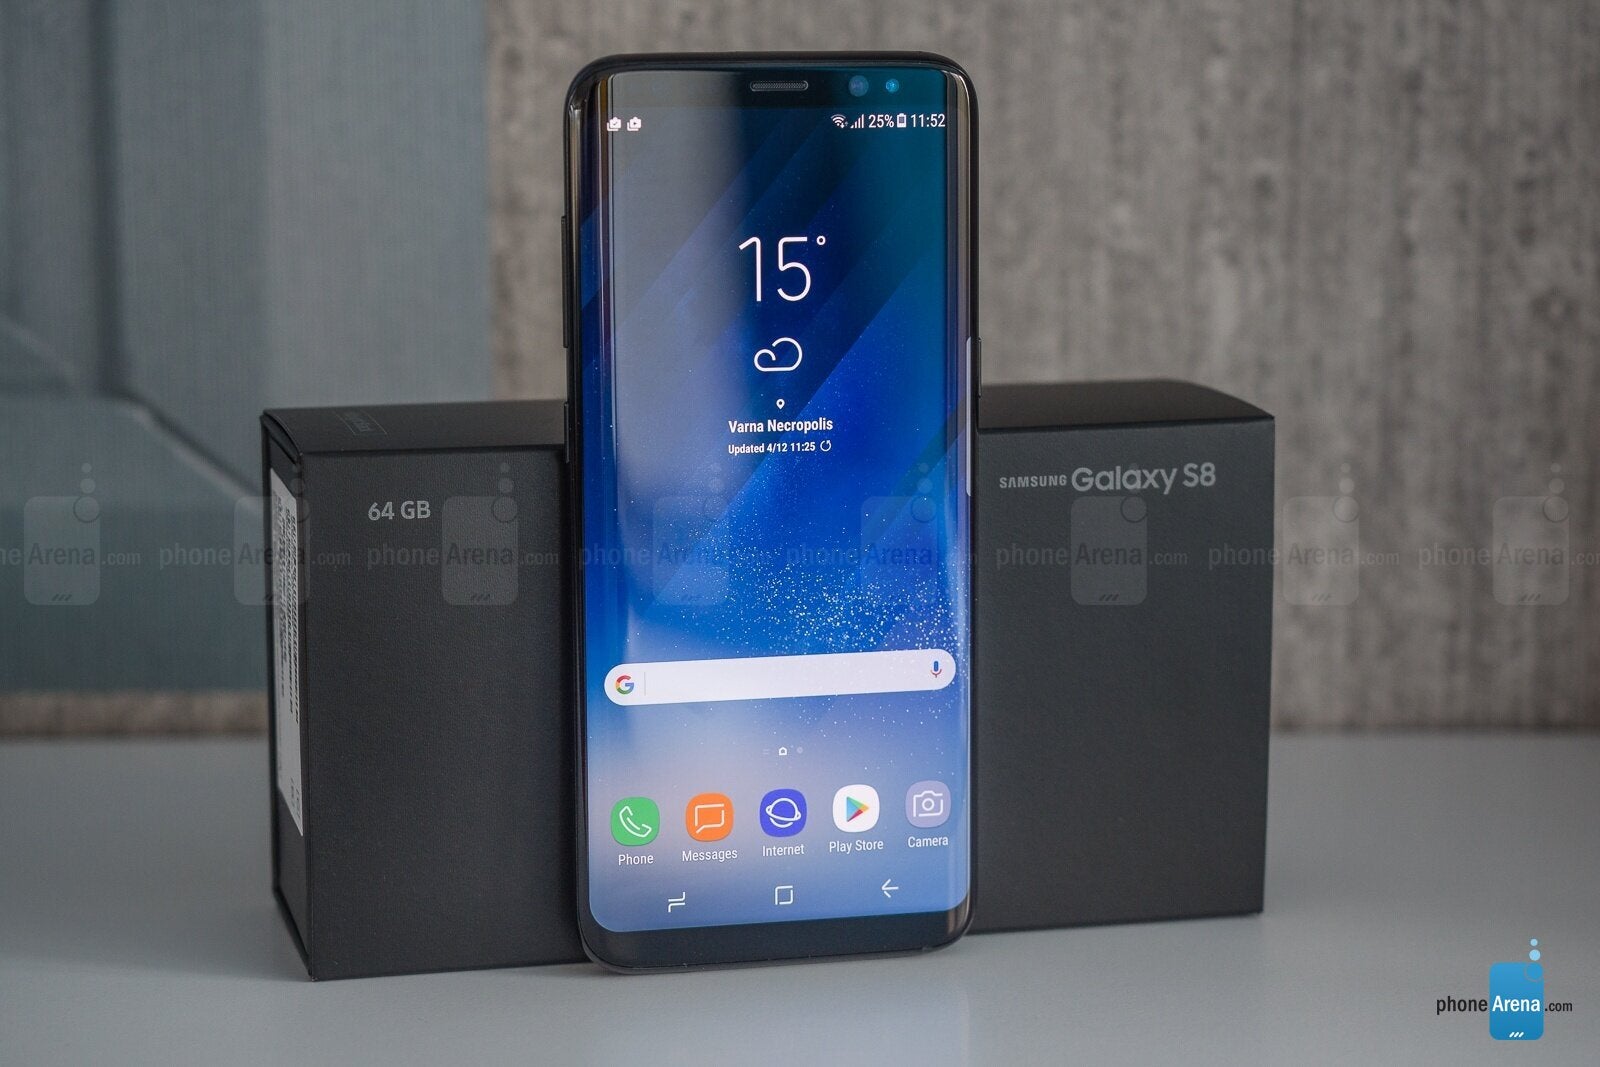 The age-old Galaxy S8 was the previous record holder - Galaxy Note 10 sales exceed expectations, crushing all Galaxy S and Note records in one country